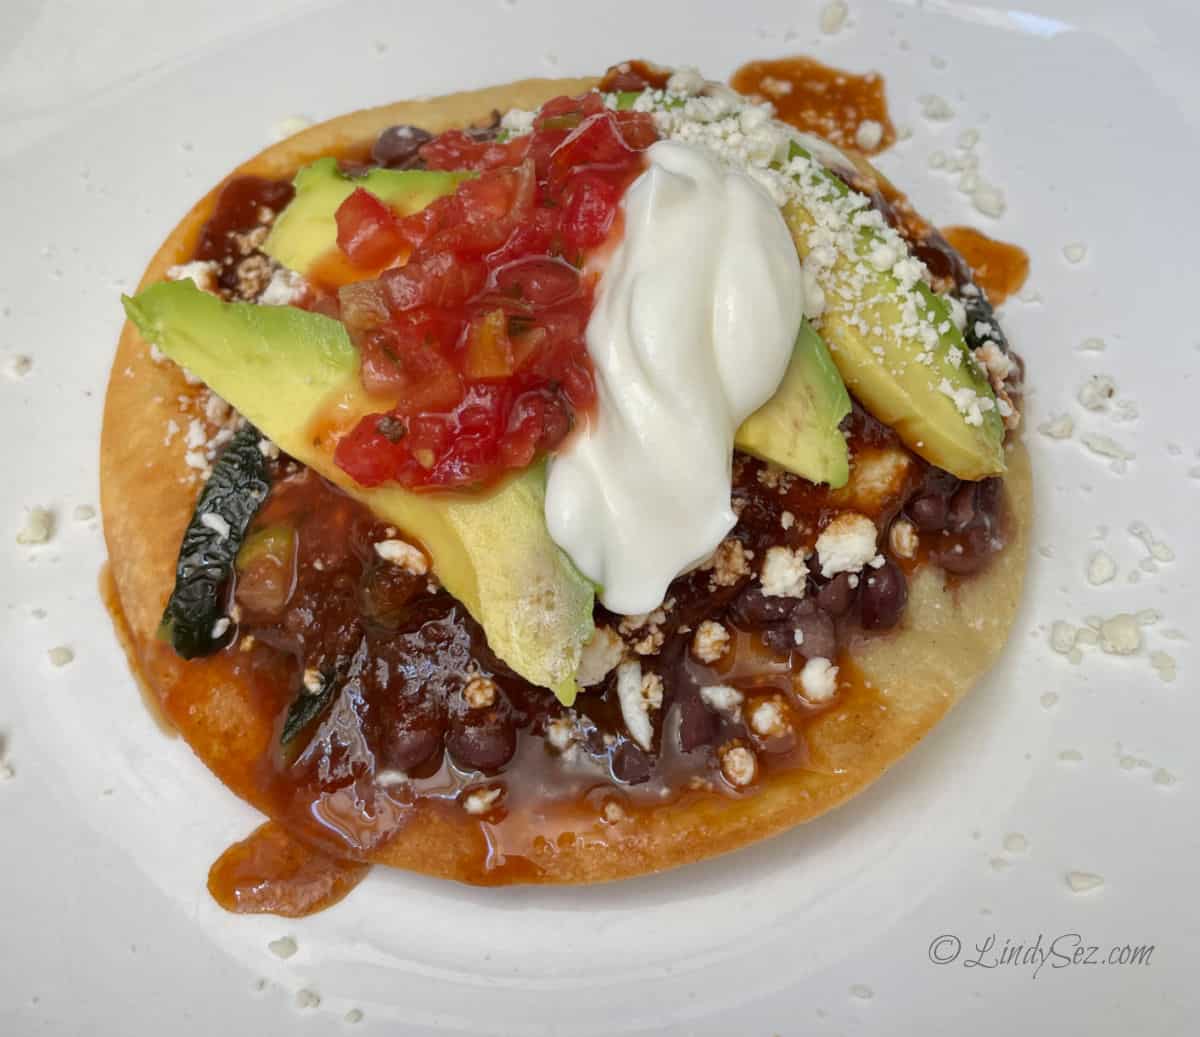 A plate of Huevos Rancheros with all the toppings.